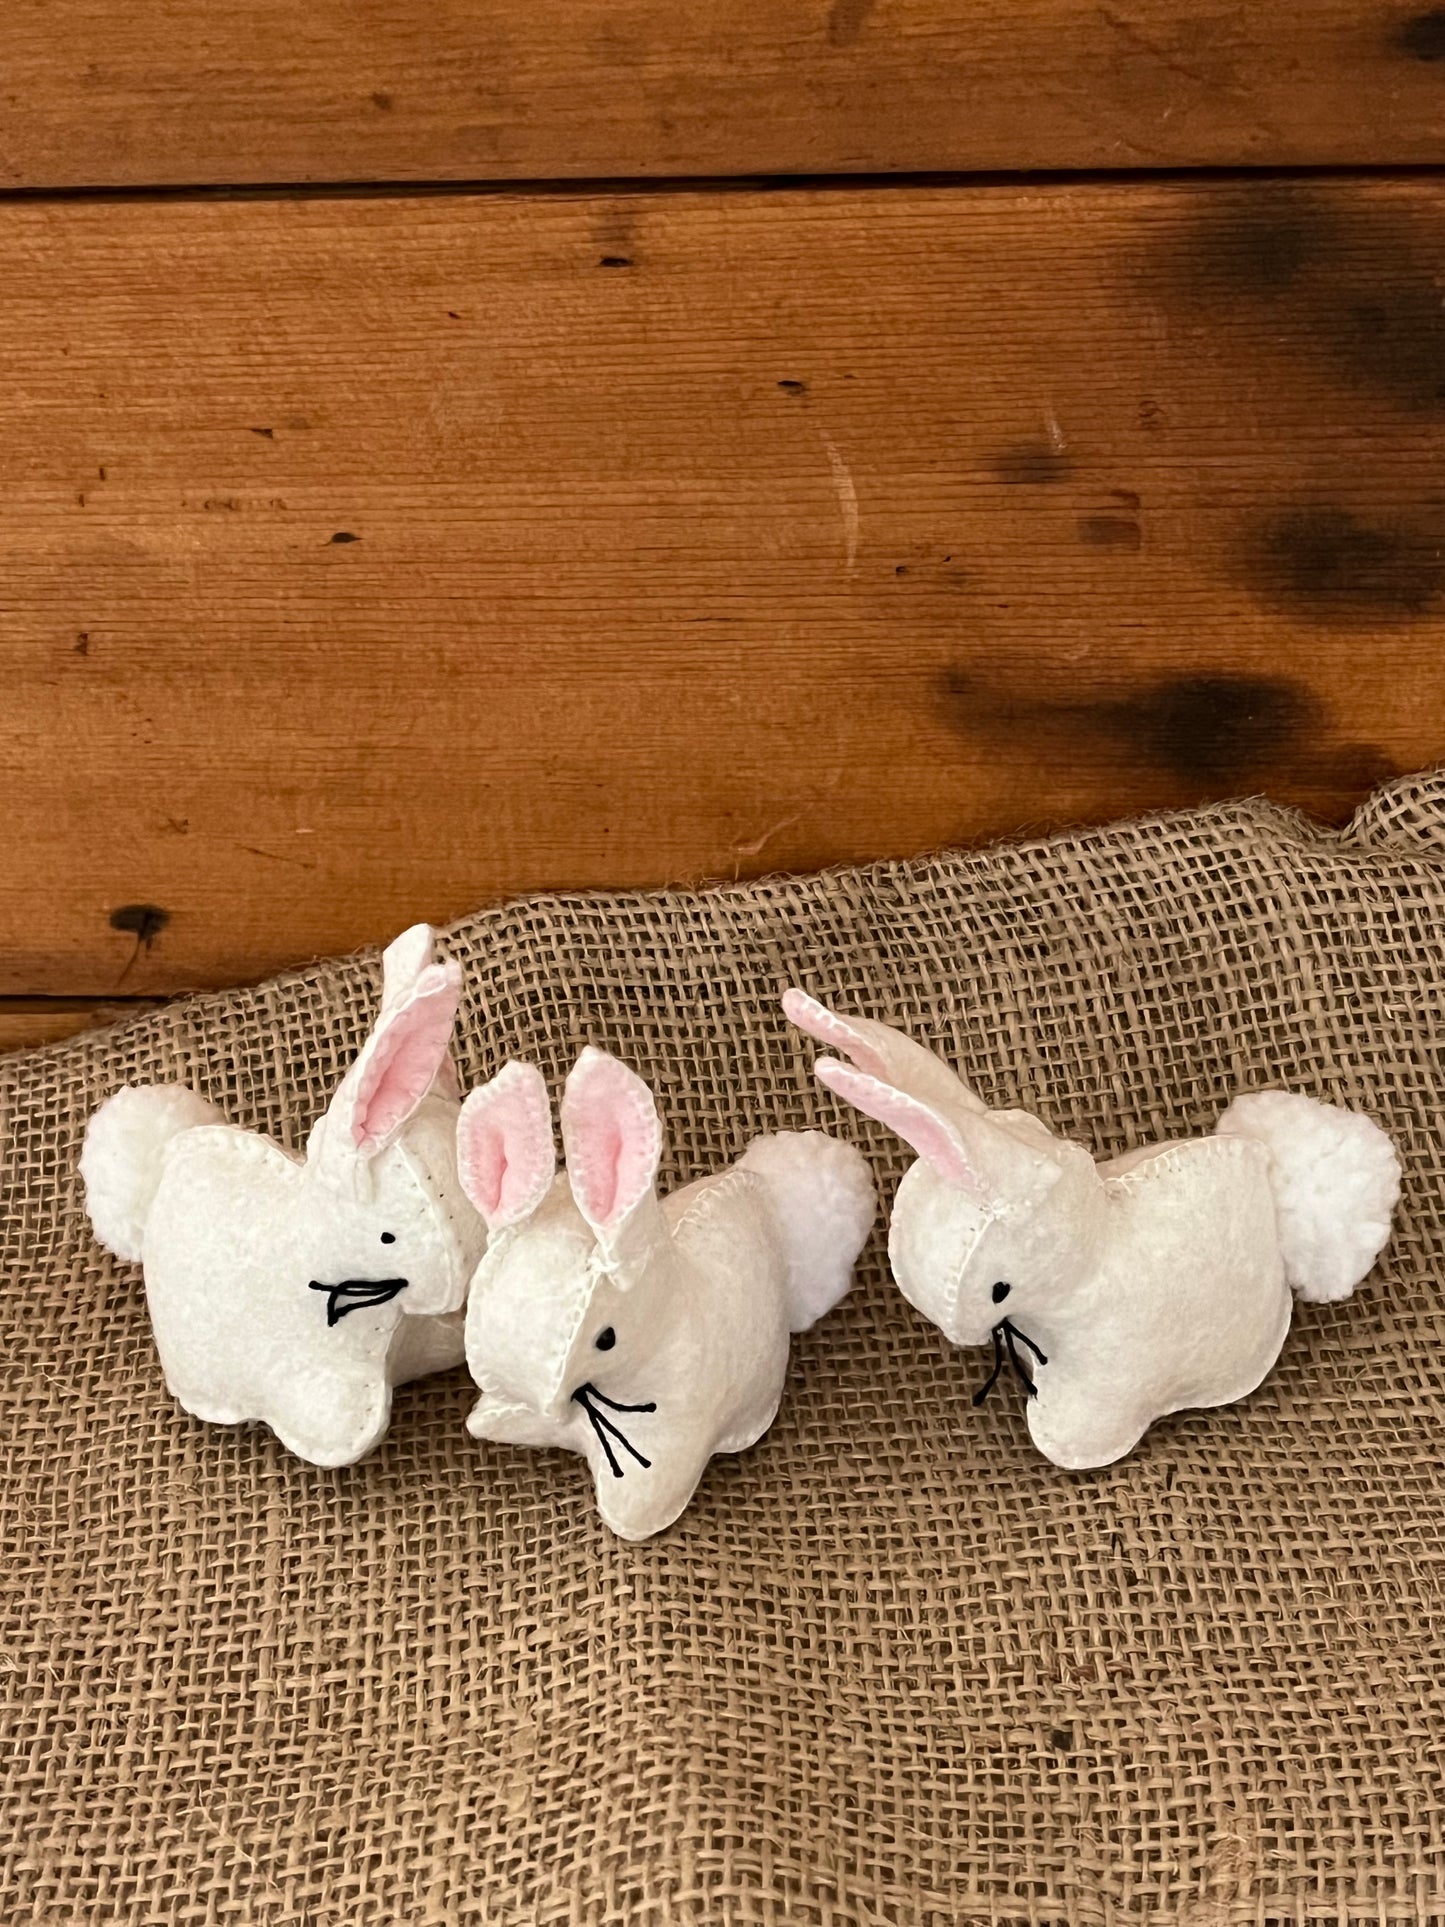 Dollhouse Play Soft Toy - Wool Felted WHITE RABBIT